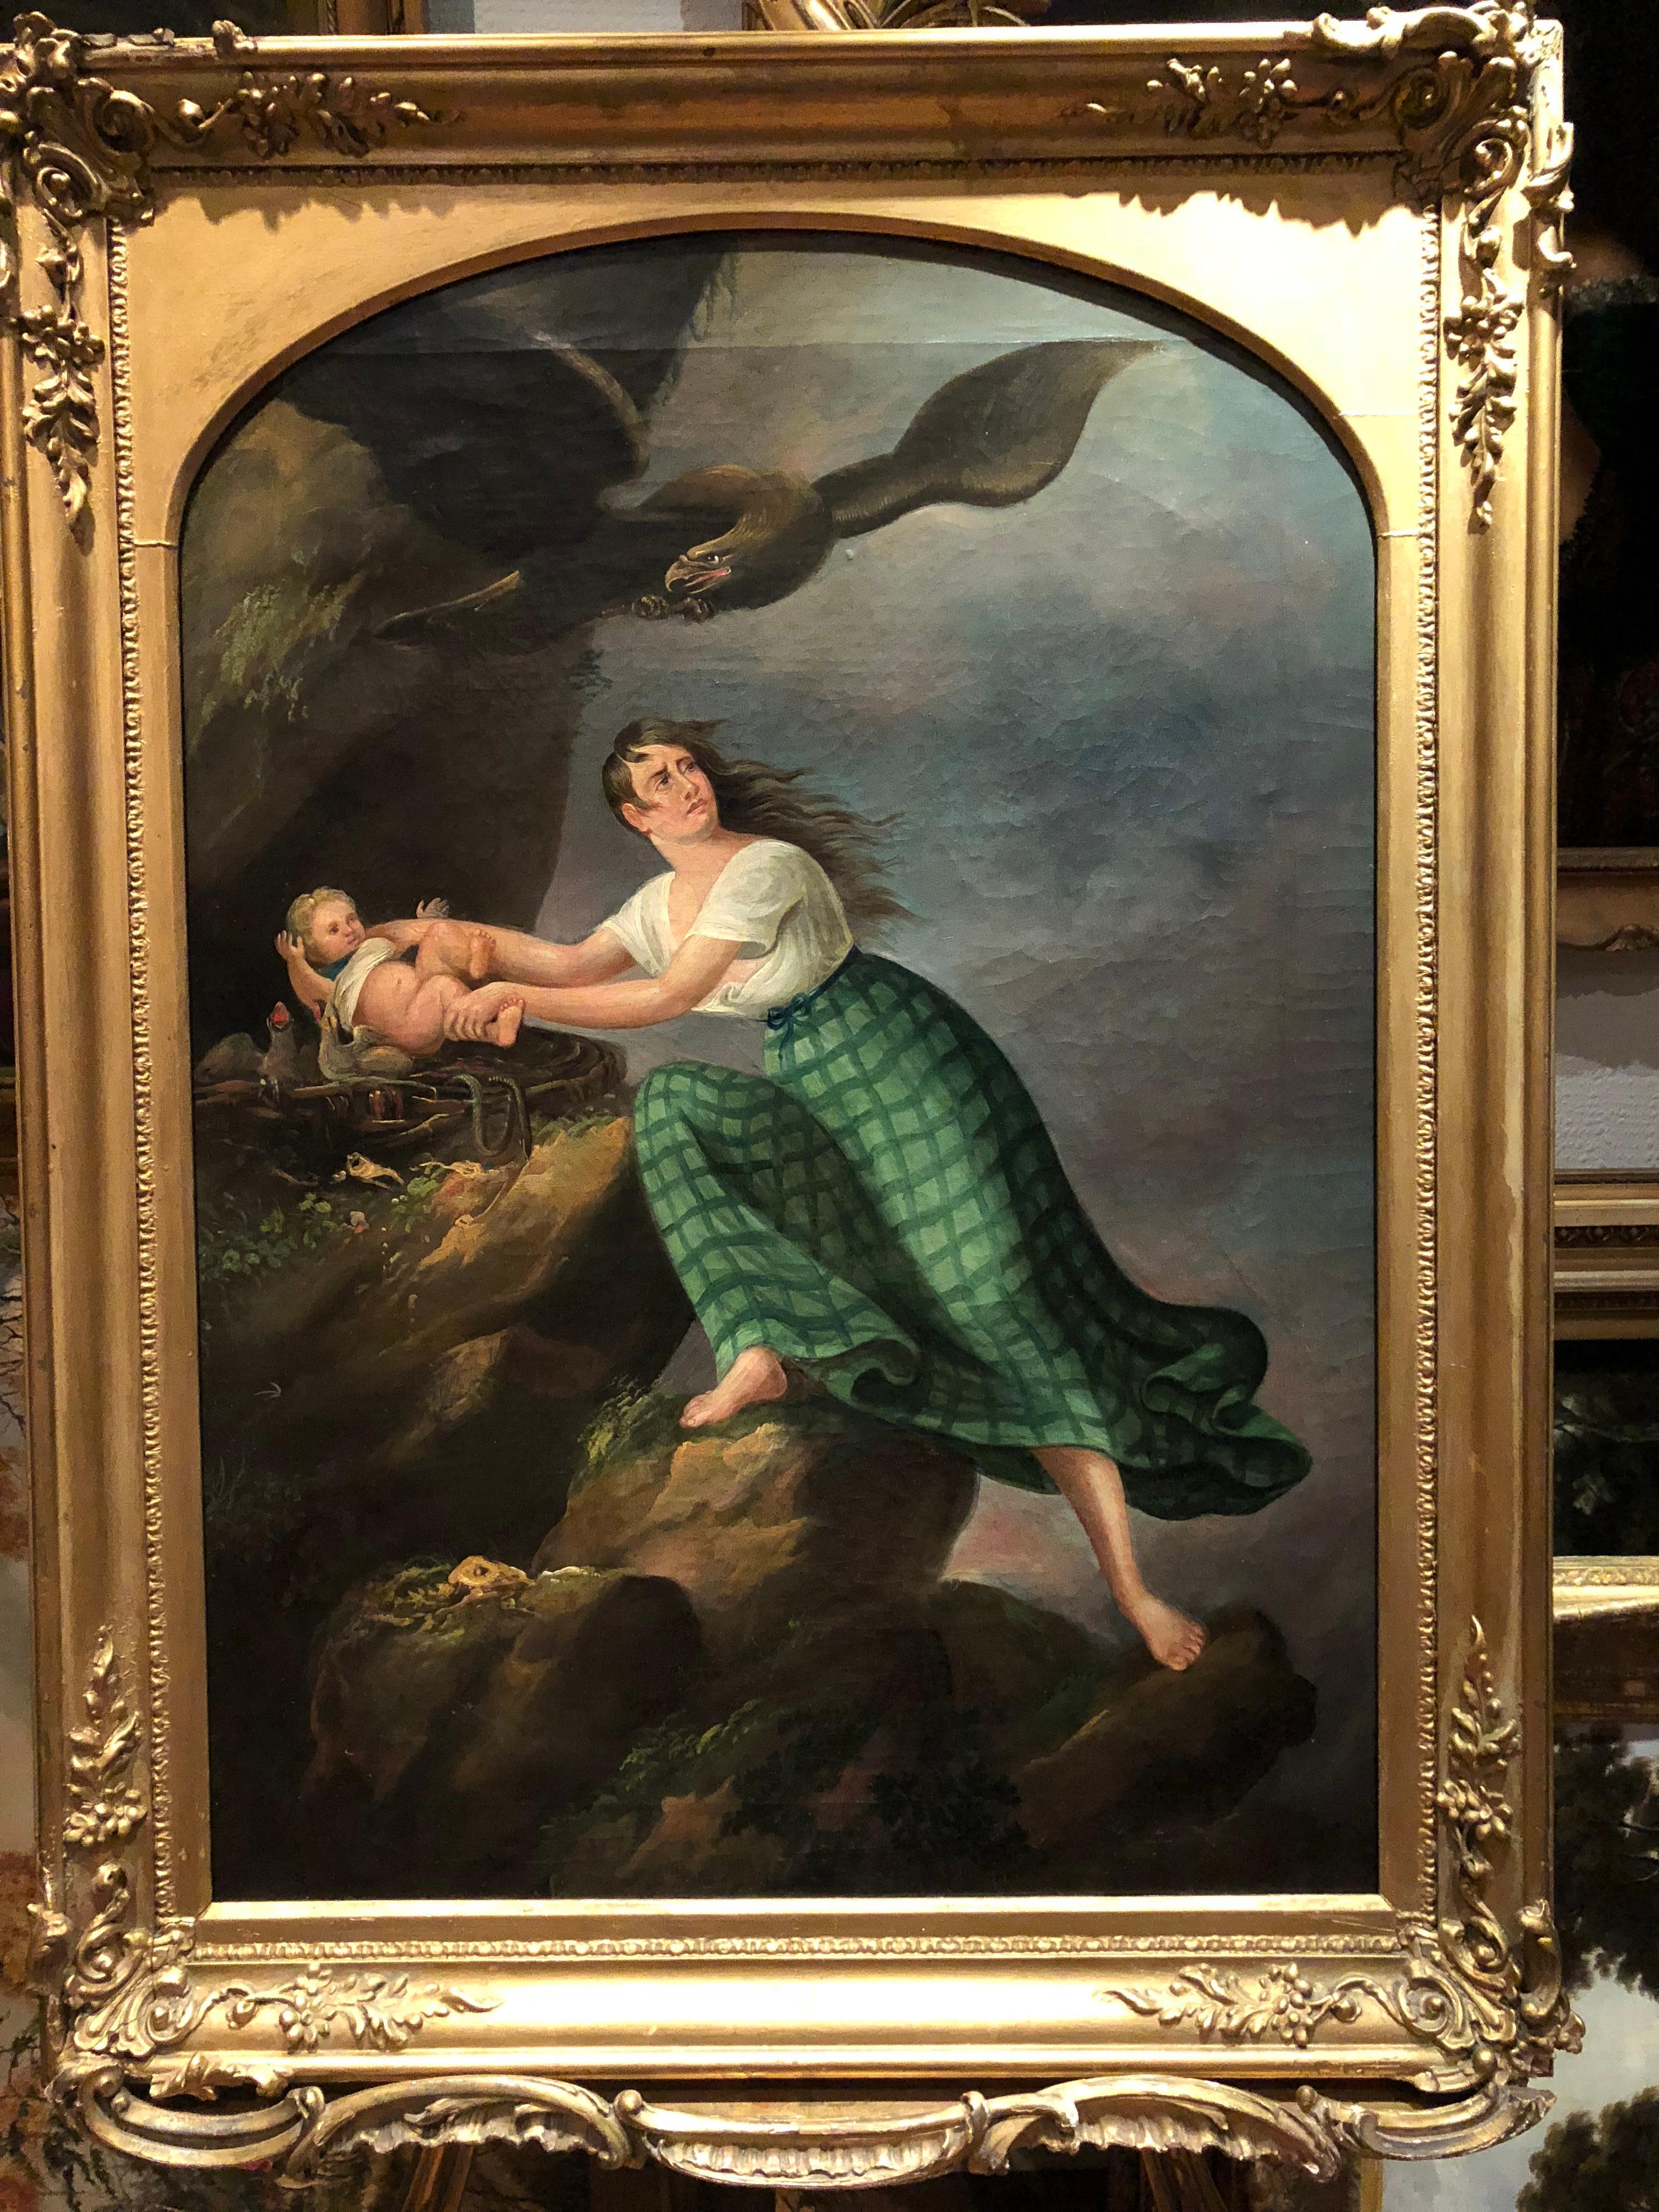 Unknown Figurative Painting - OLD MASTER OIL PAINTING 18th CENTURY Scottish School FINE DETAIL GOLD GILT FRAME